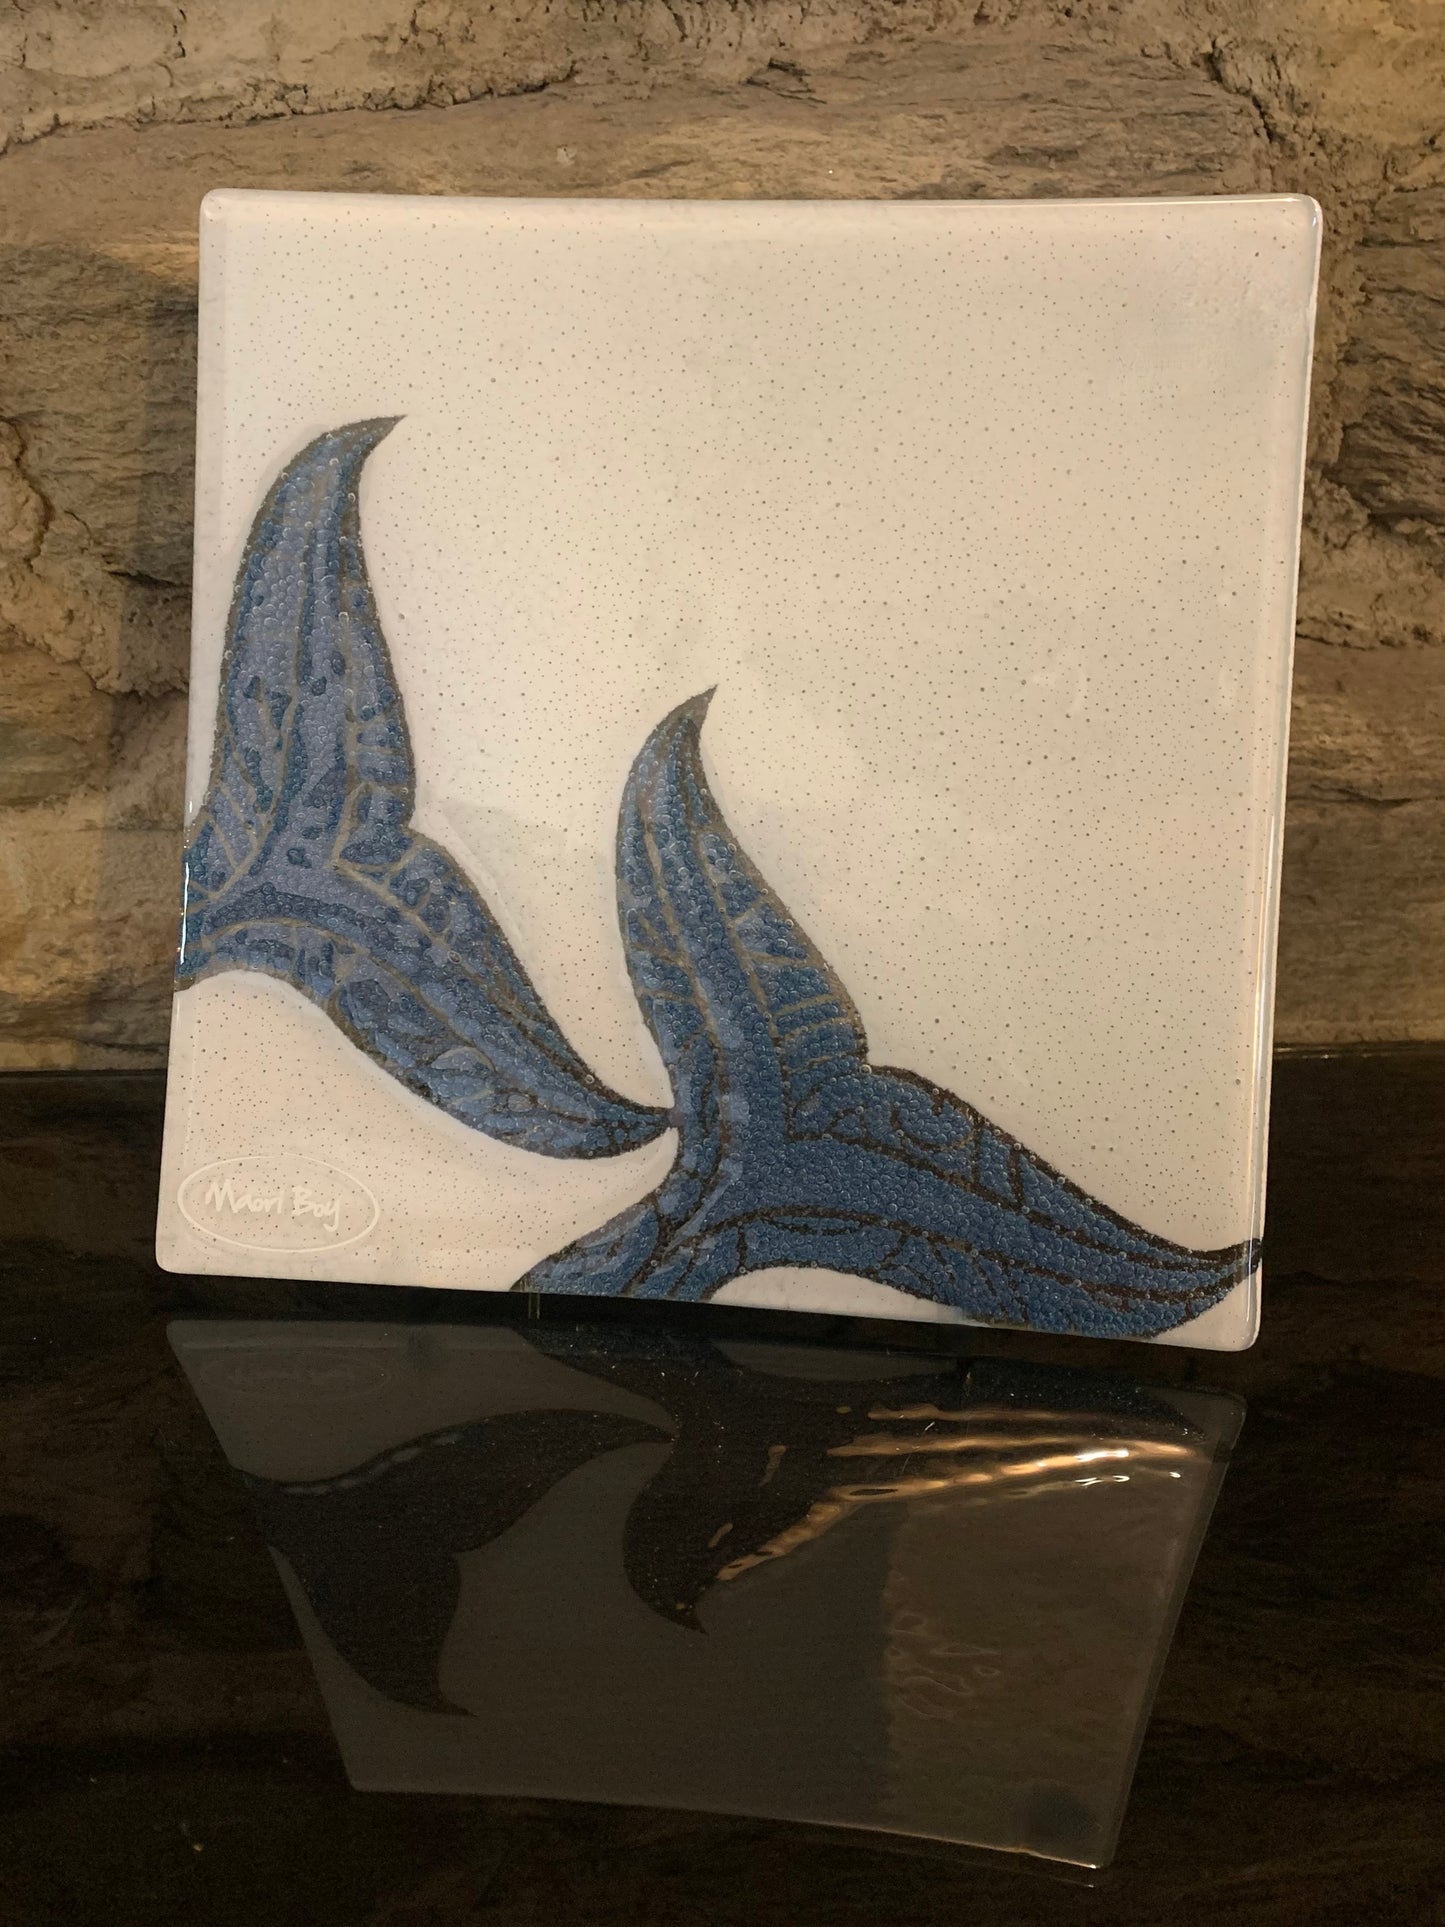 Fused Glass Platter by Maori Boy - Whale Tail Design 20cm (white and light blue)